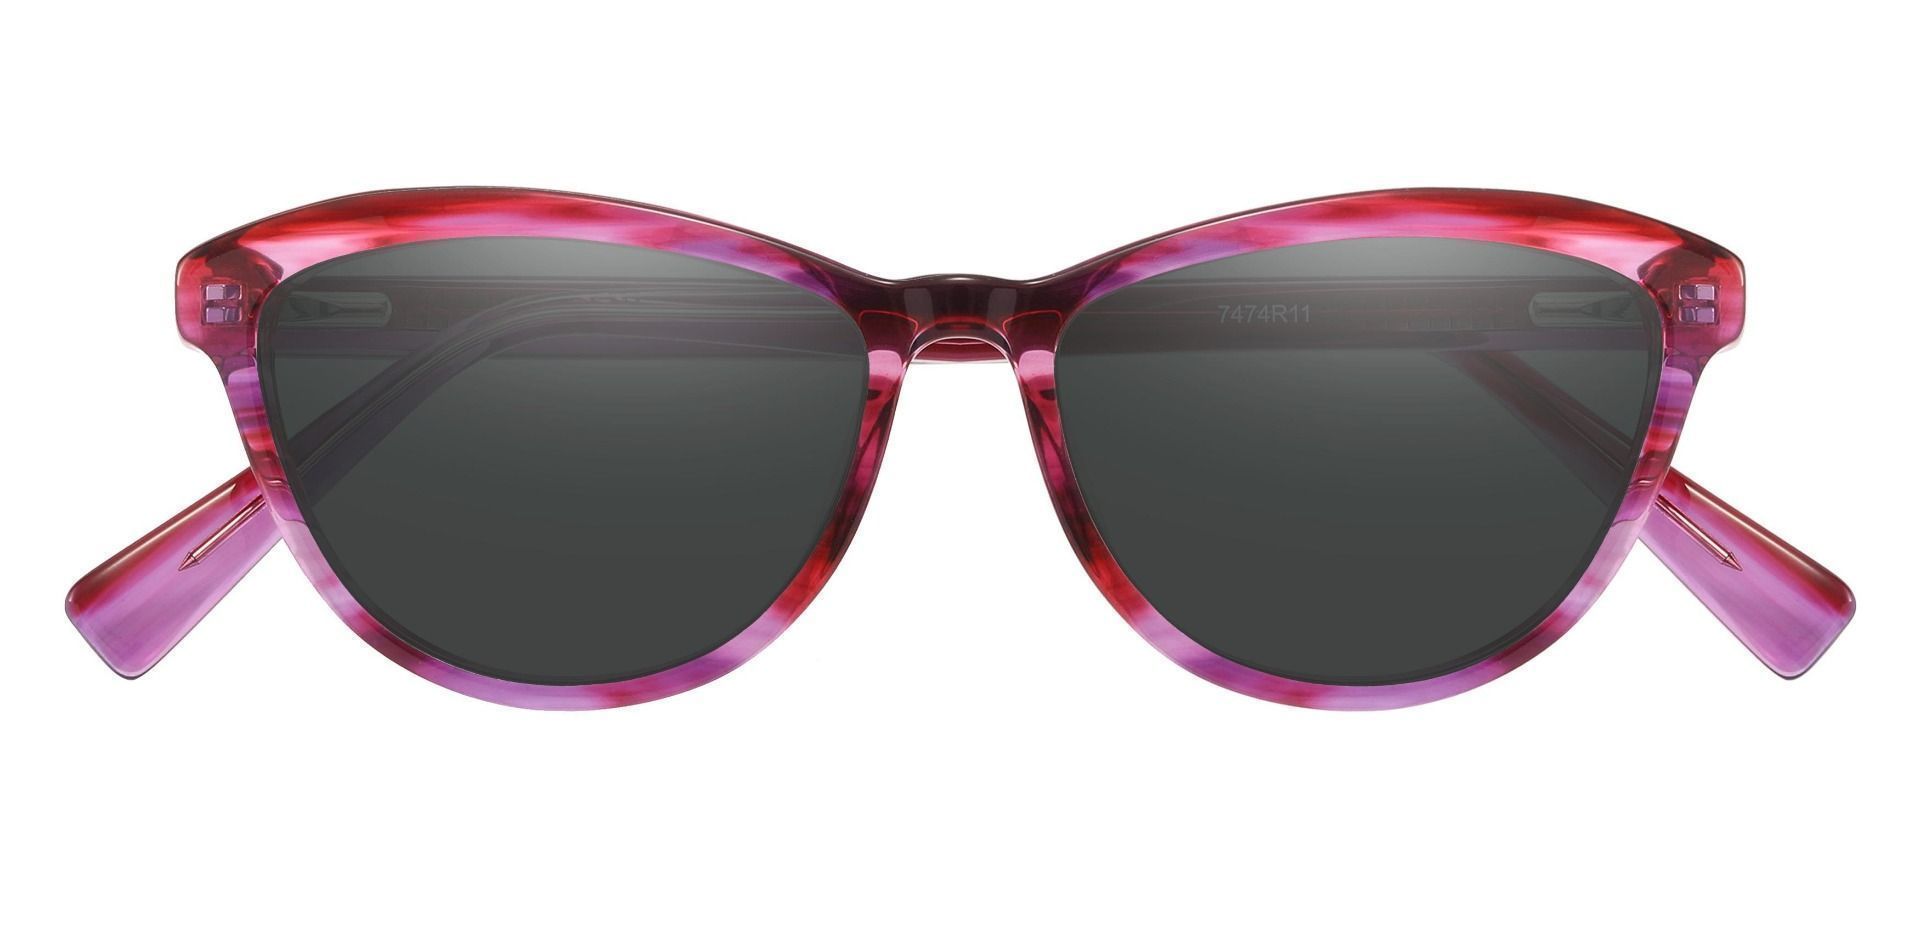 Bexley Cat Eye Non-Rx Sunglasses - Purple Frame With Gray Lenses